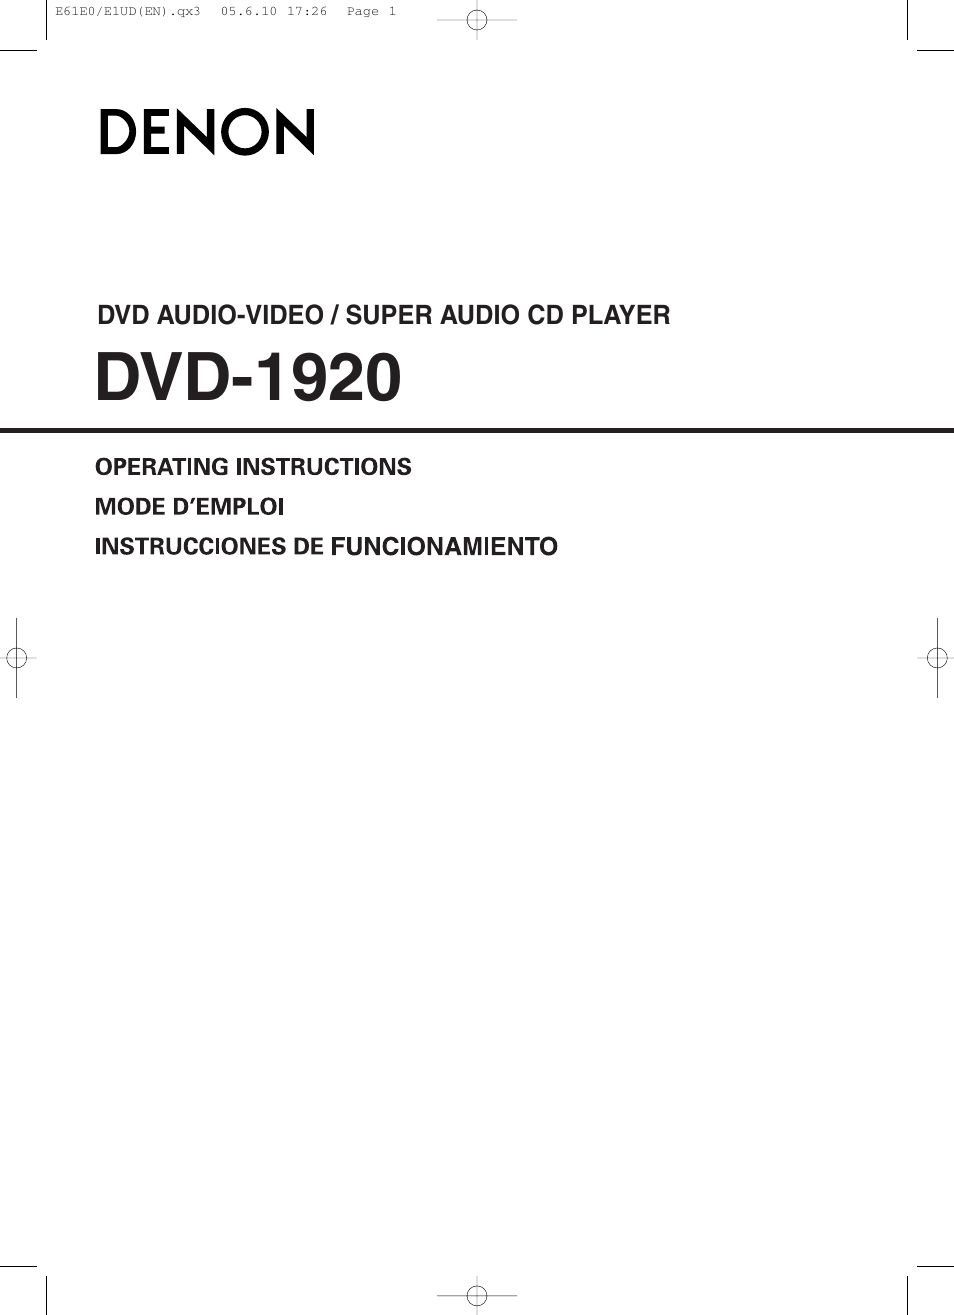 Denon DVD-1920 User Manual | 62 pages